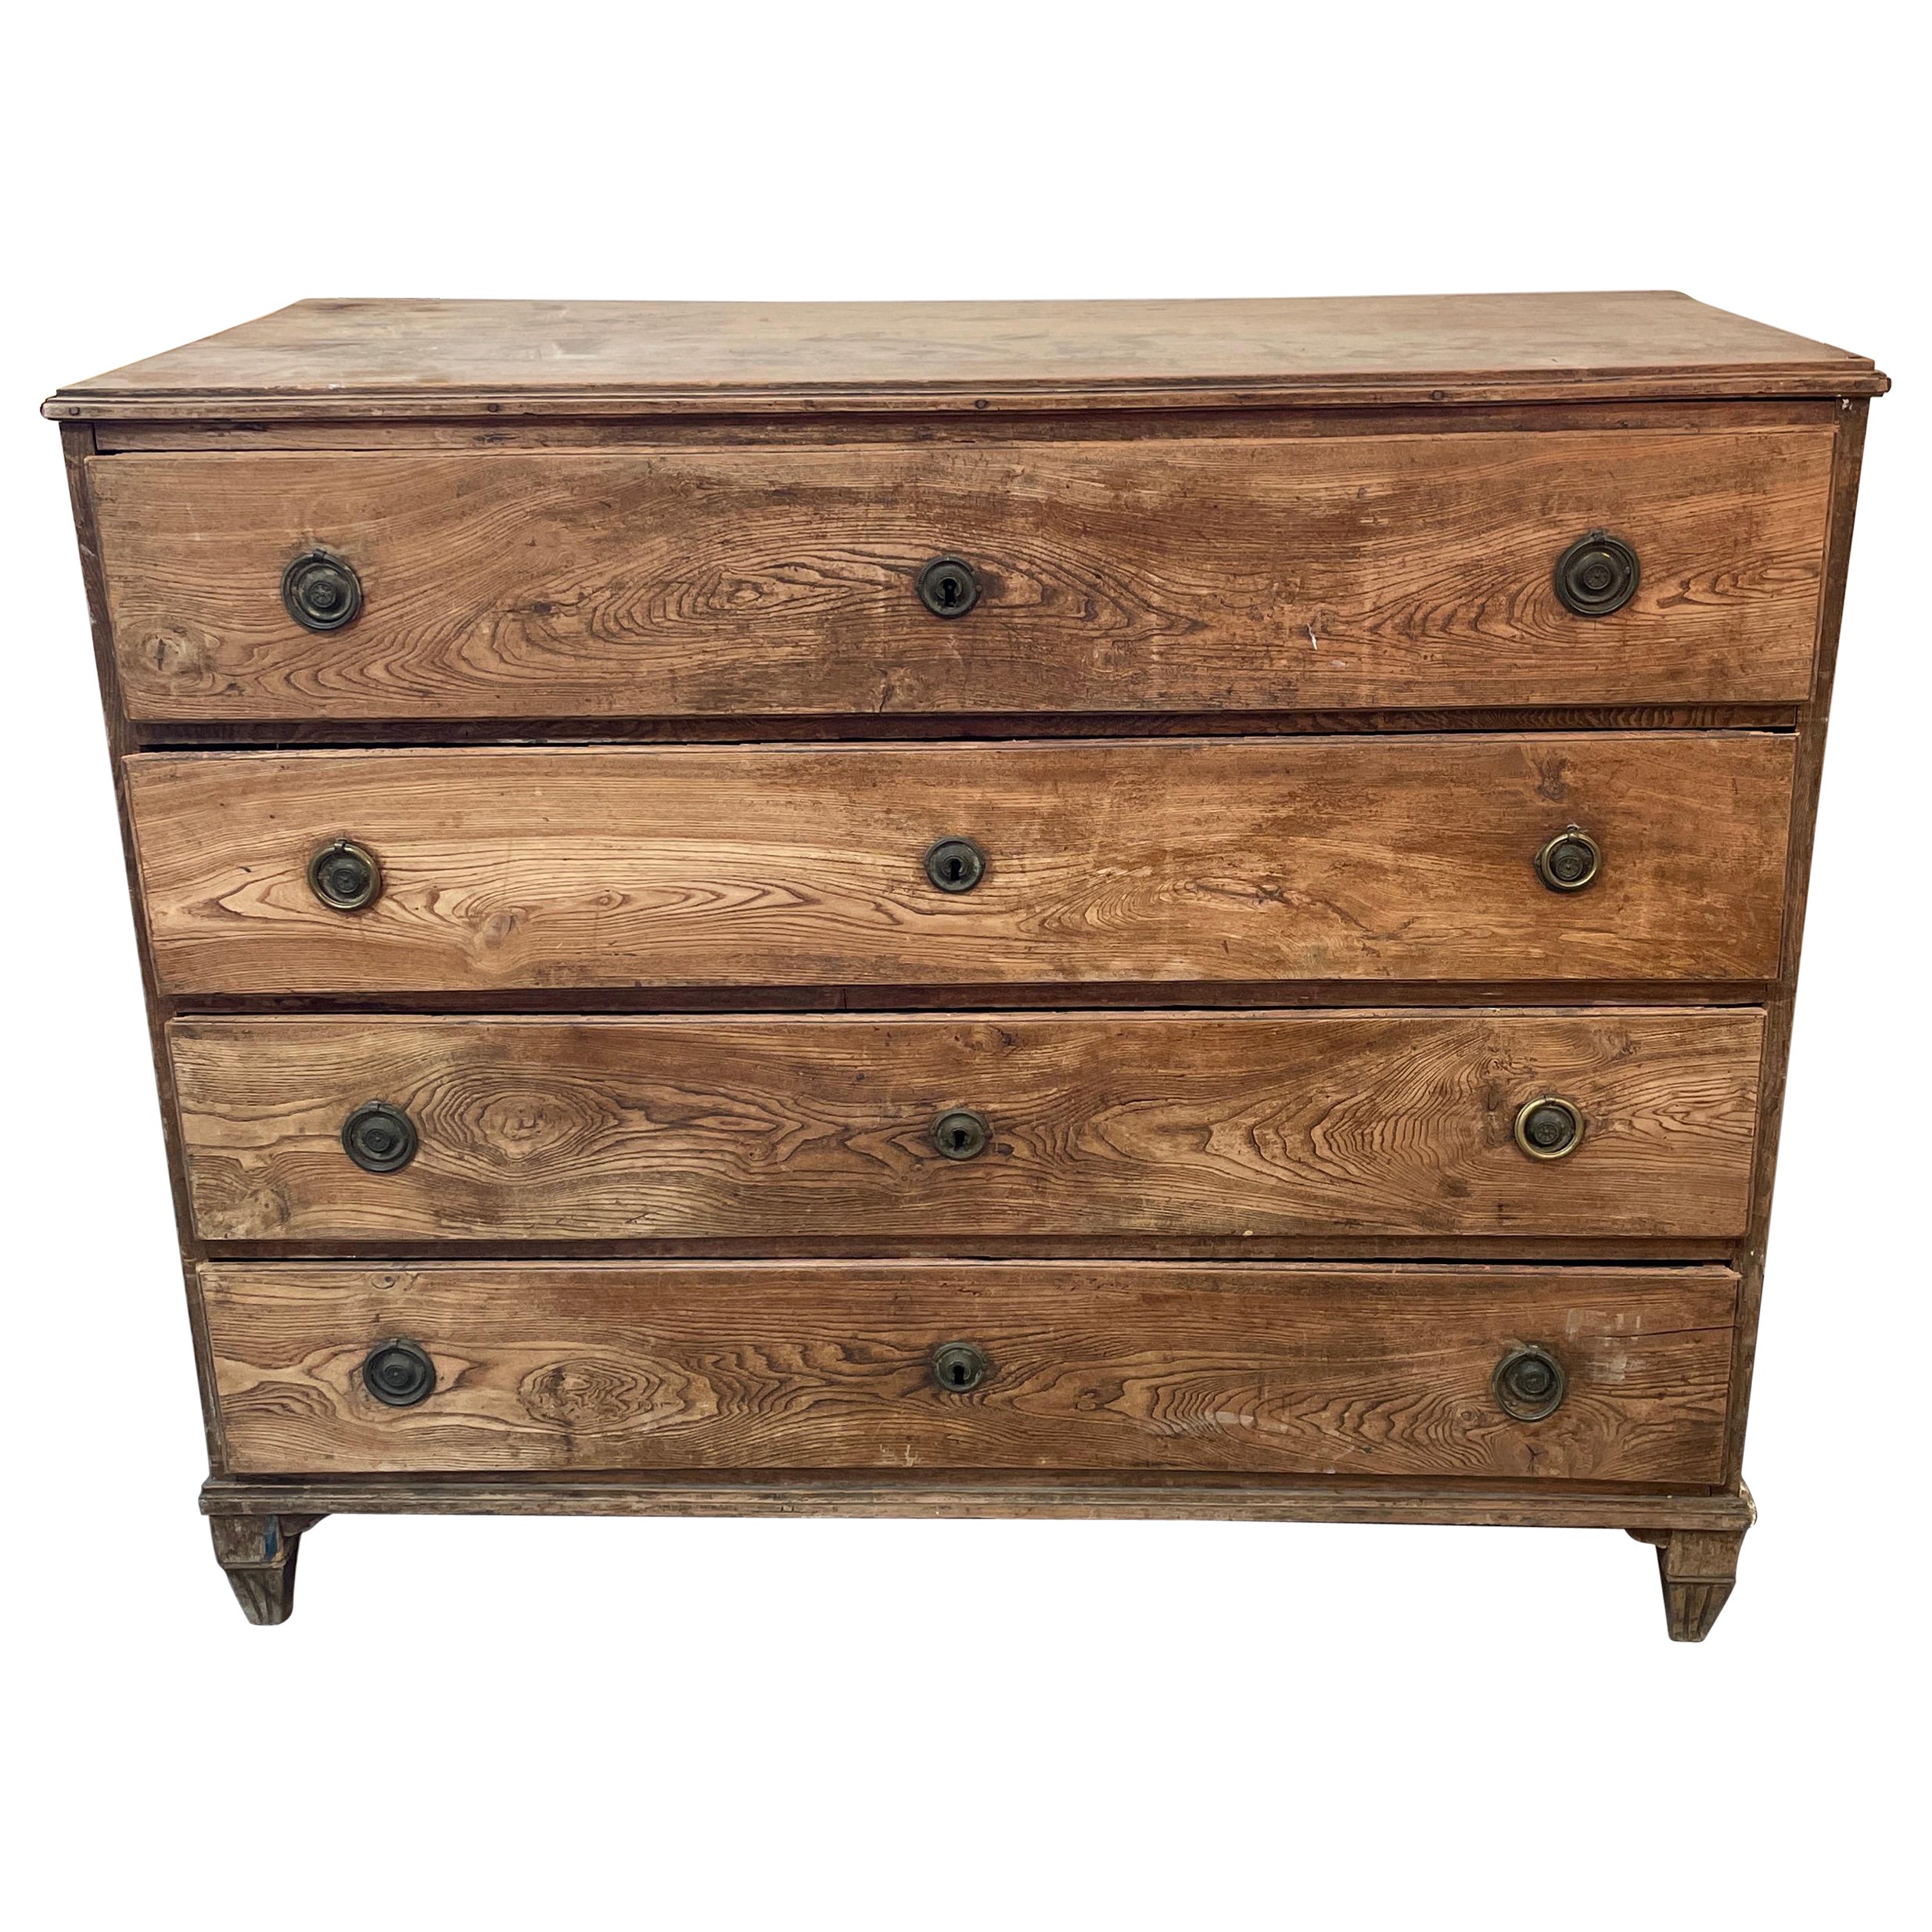 19th Century, Gustavian Style Pine Chest of Drawers from Sweden